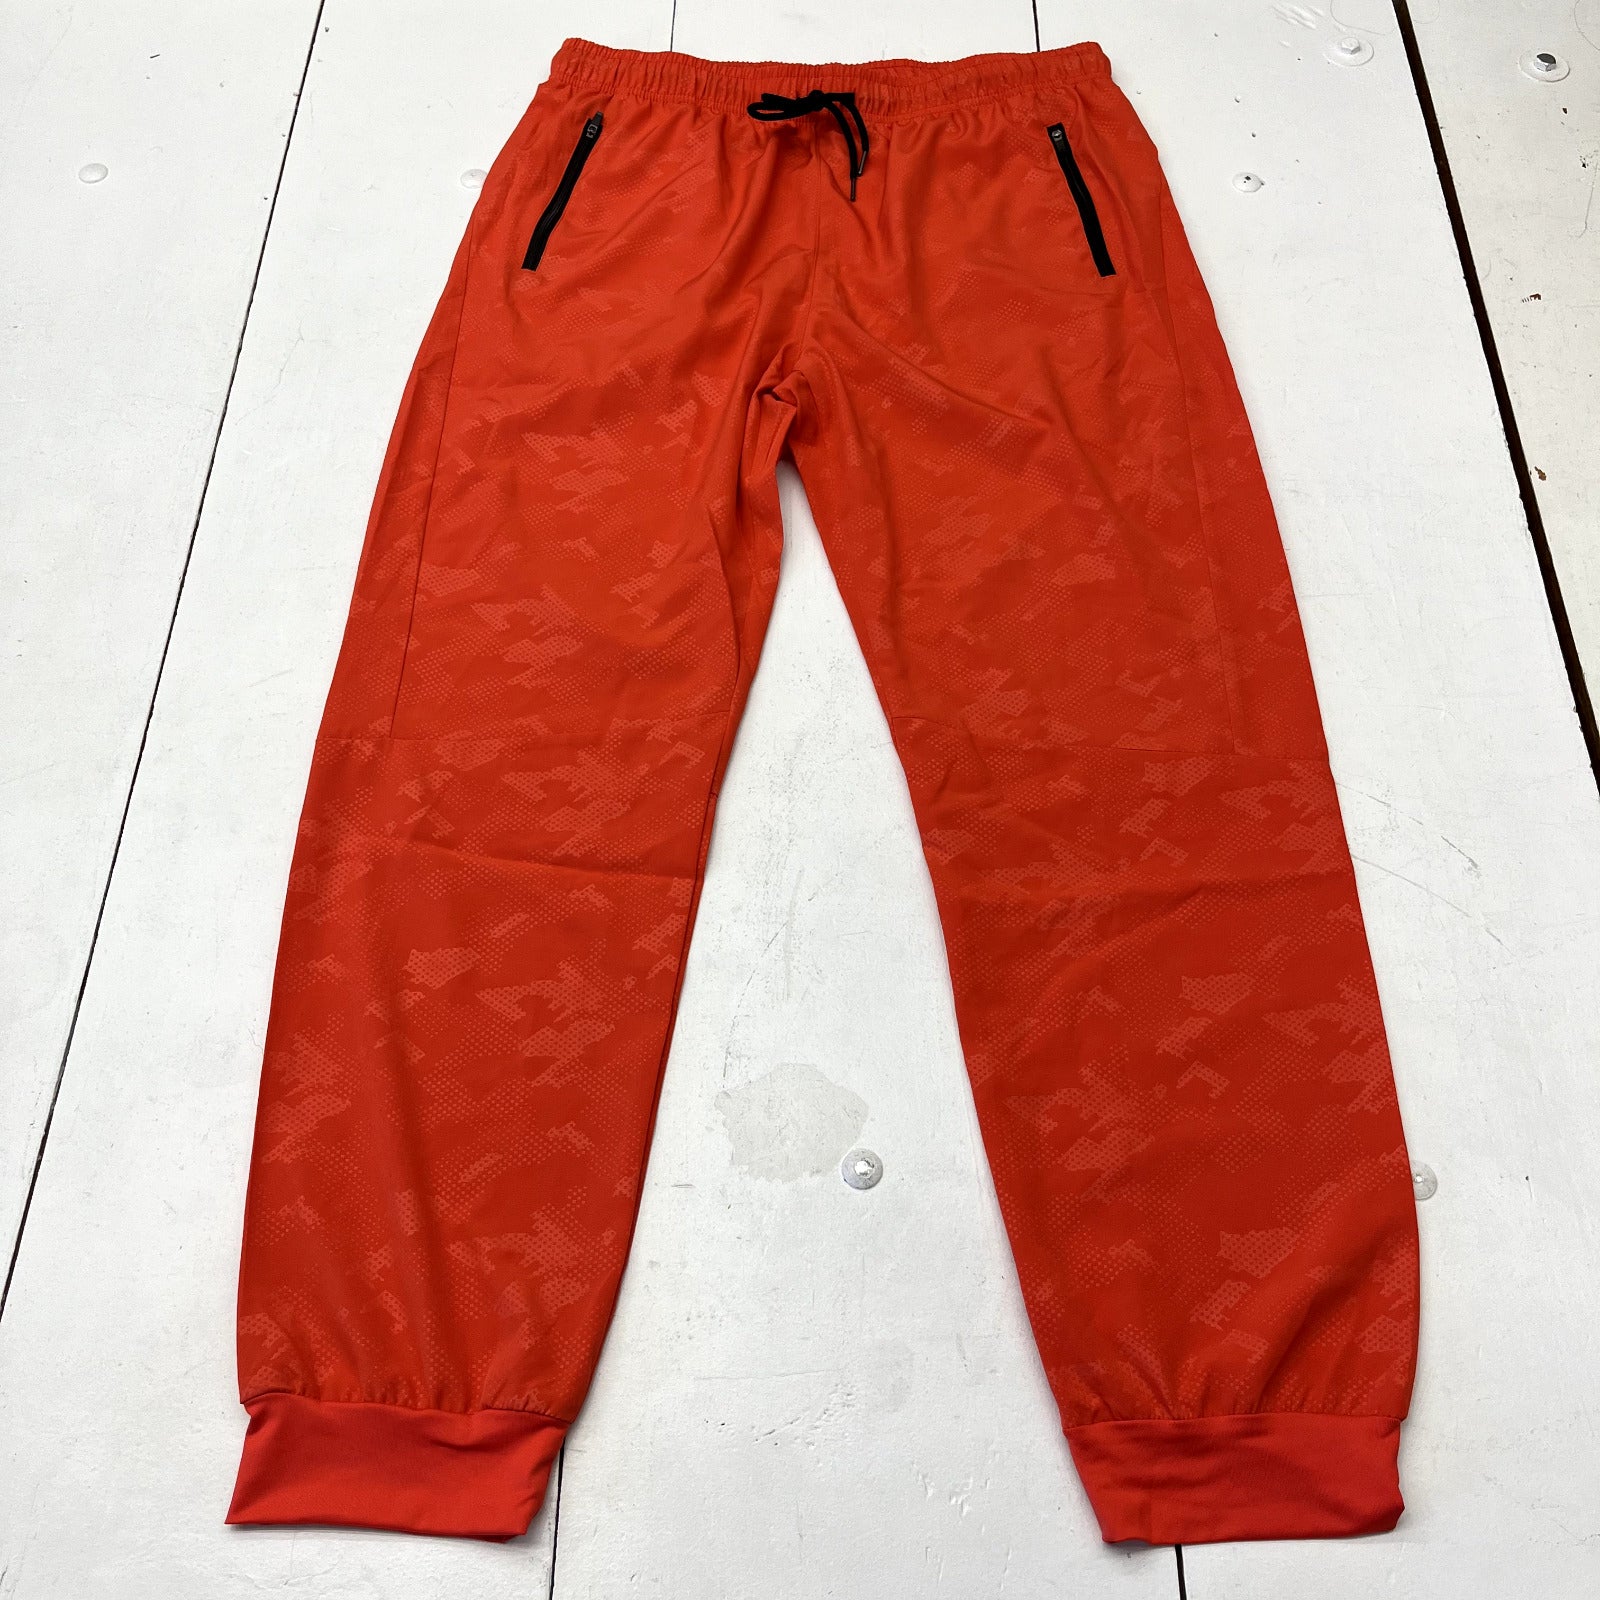 Elier Red Orange Joggers With Pockets Mens Size X-Large